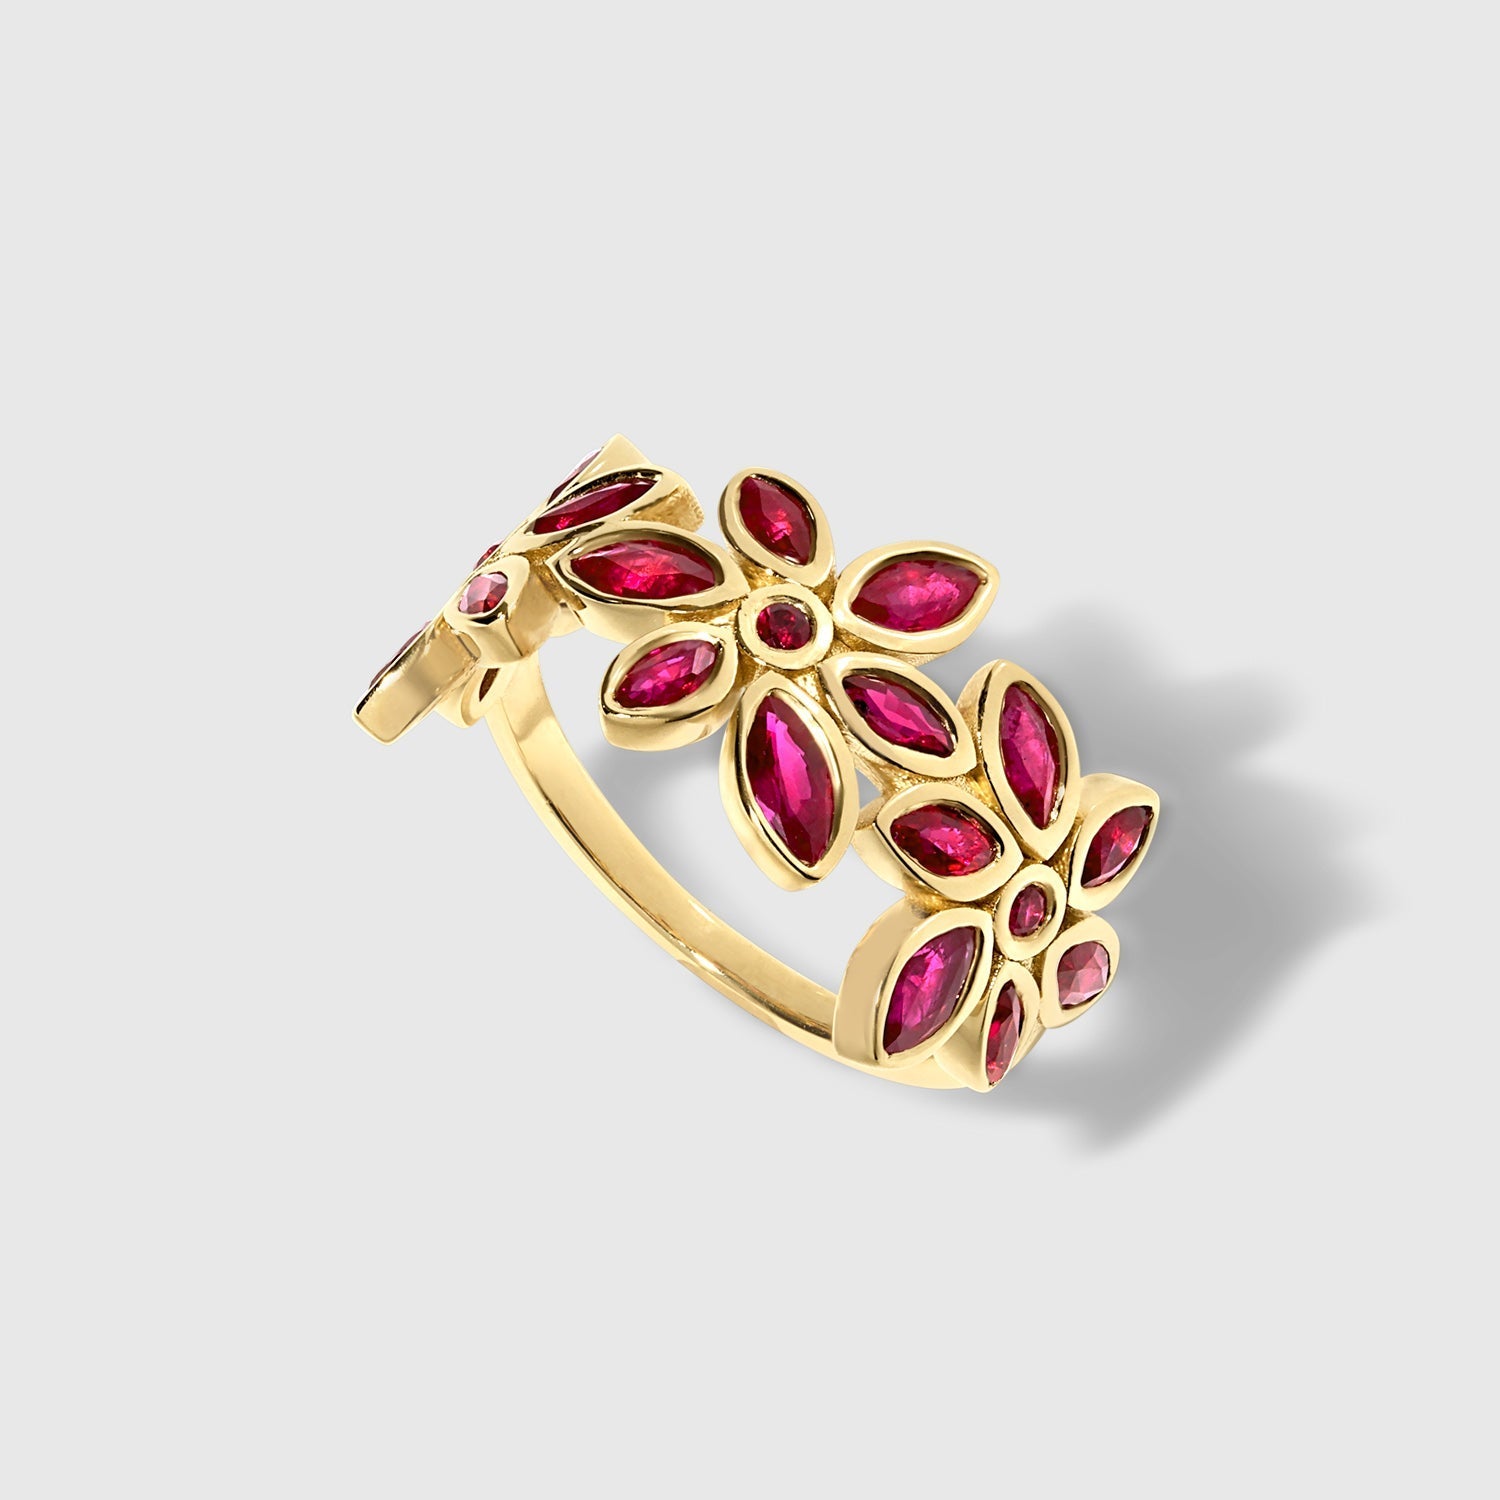 Maria’s - Three Flowers Ruby Ring – La Fleur Rouge Collection of Rubies & Solid Gold - Aurora Laffite Jewelry